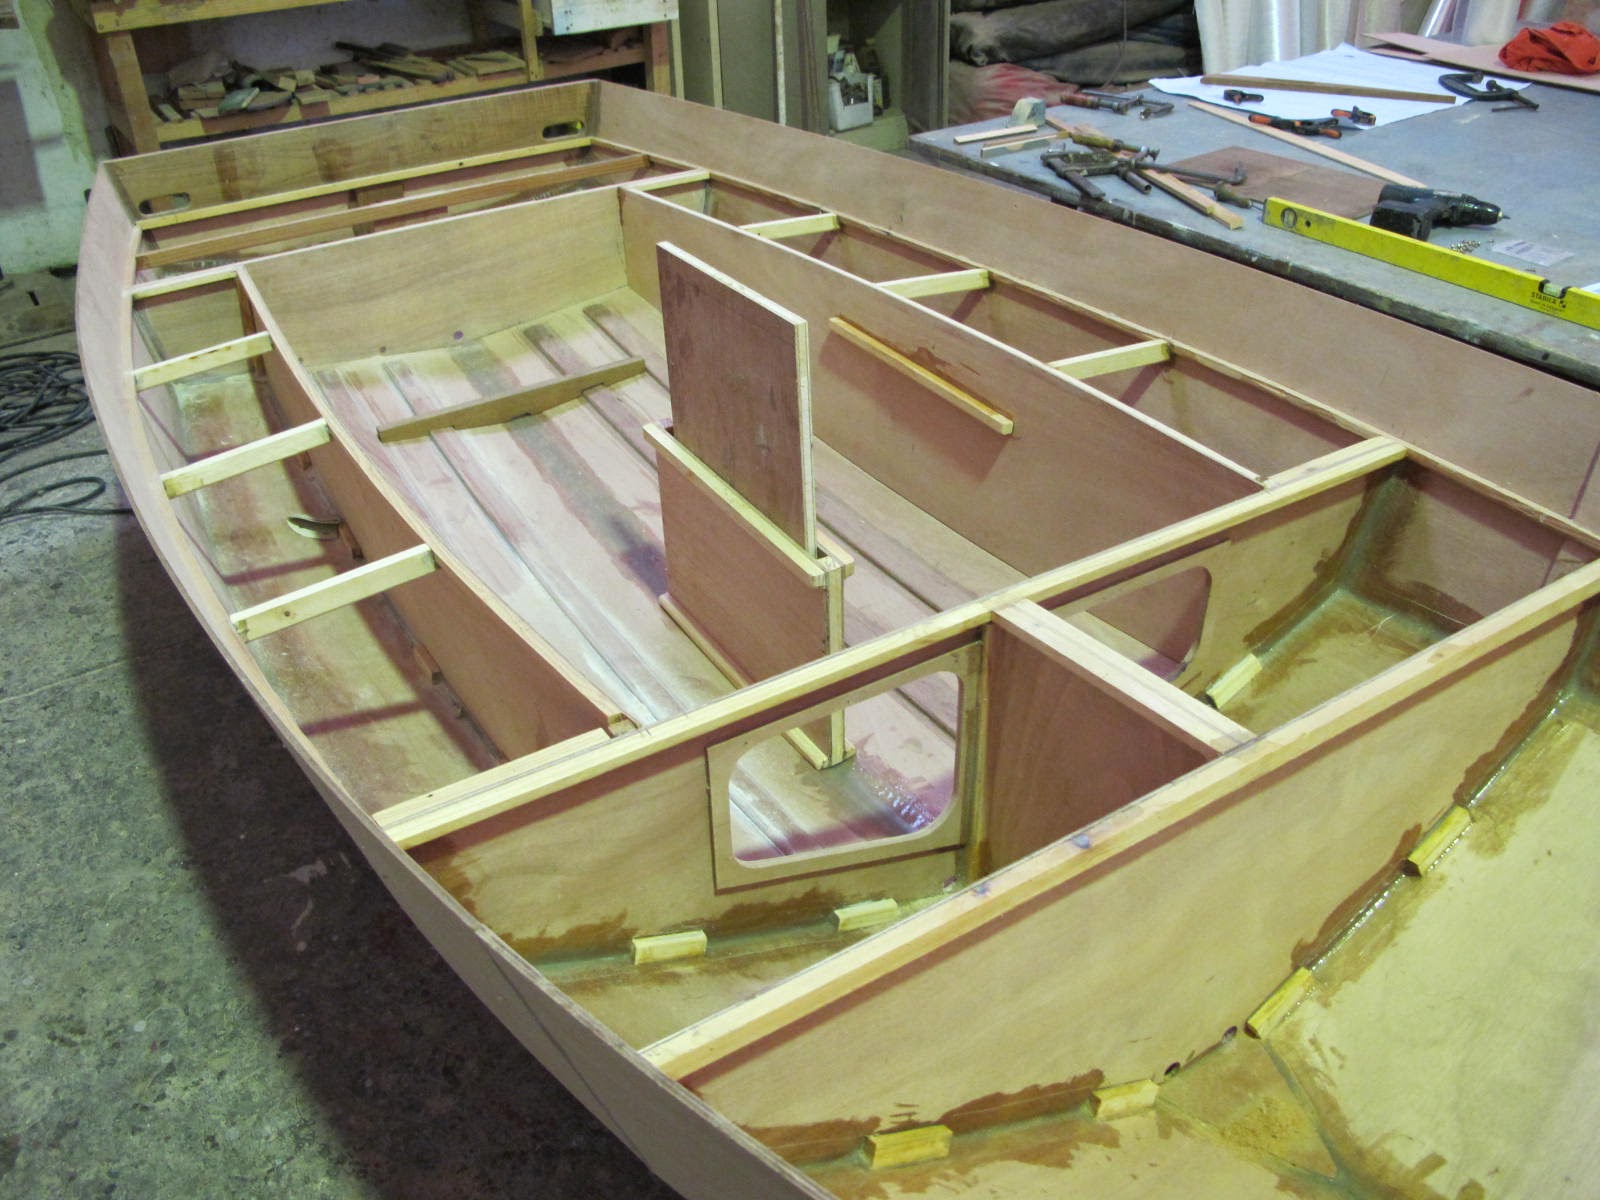 CKD Boats - Roy Mc Bride: Mirror dinghy whats under the 